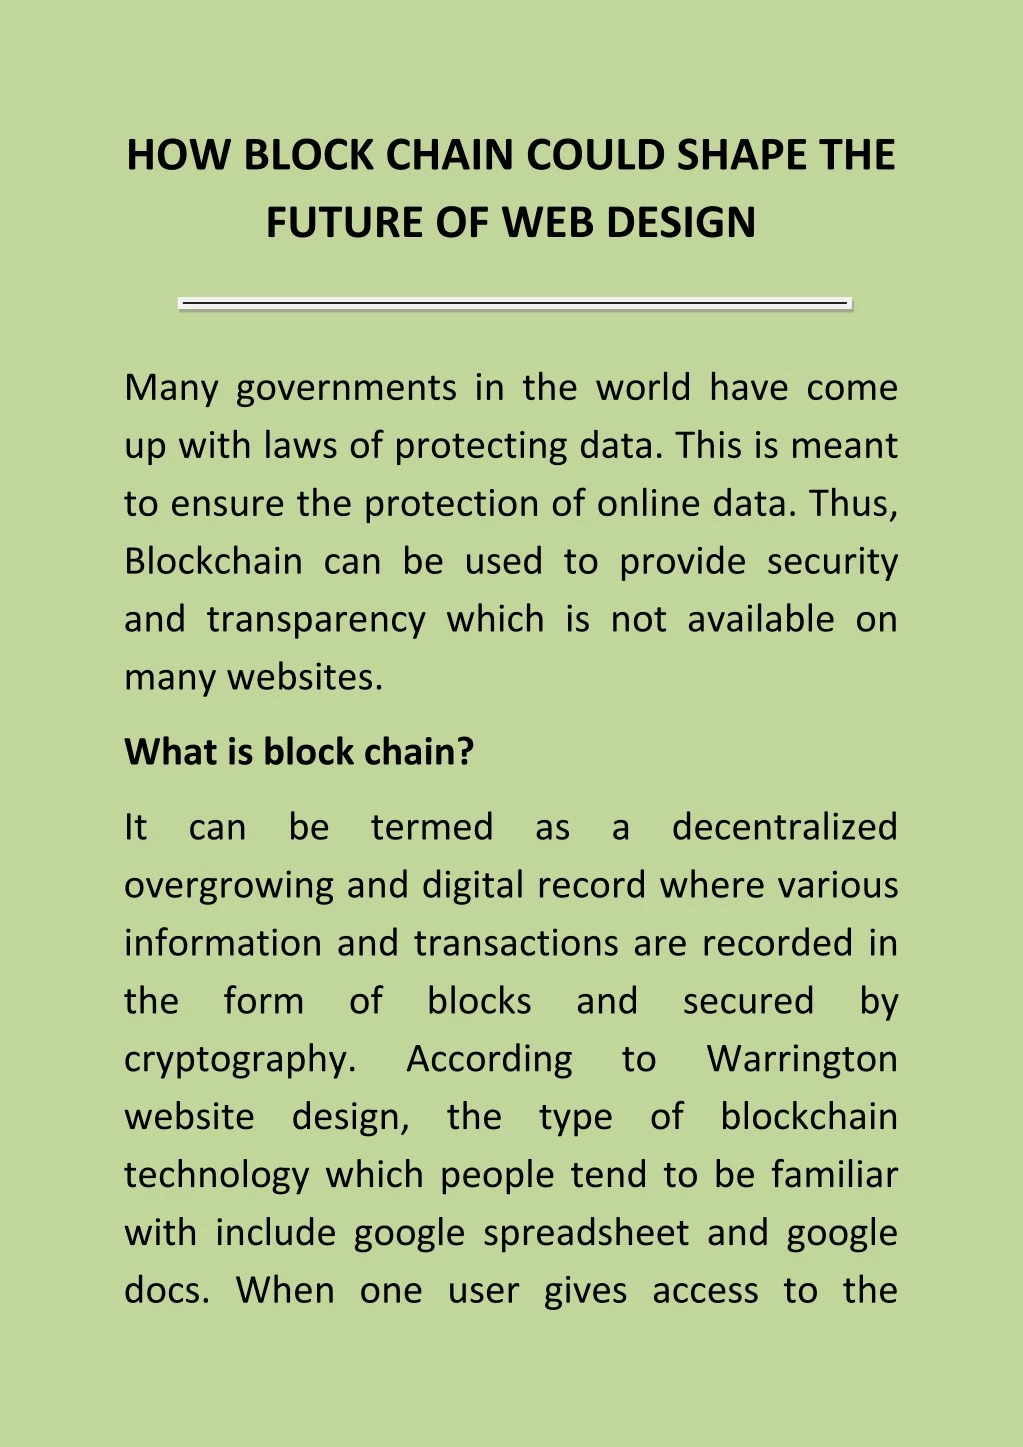 how block chain could shape the future